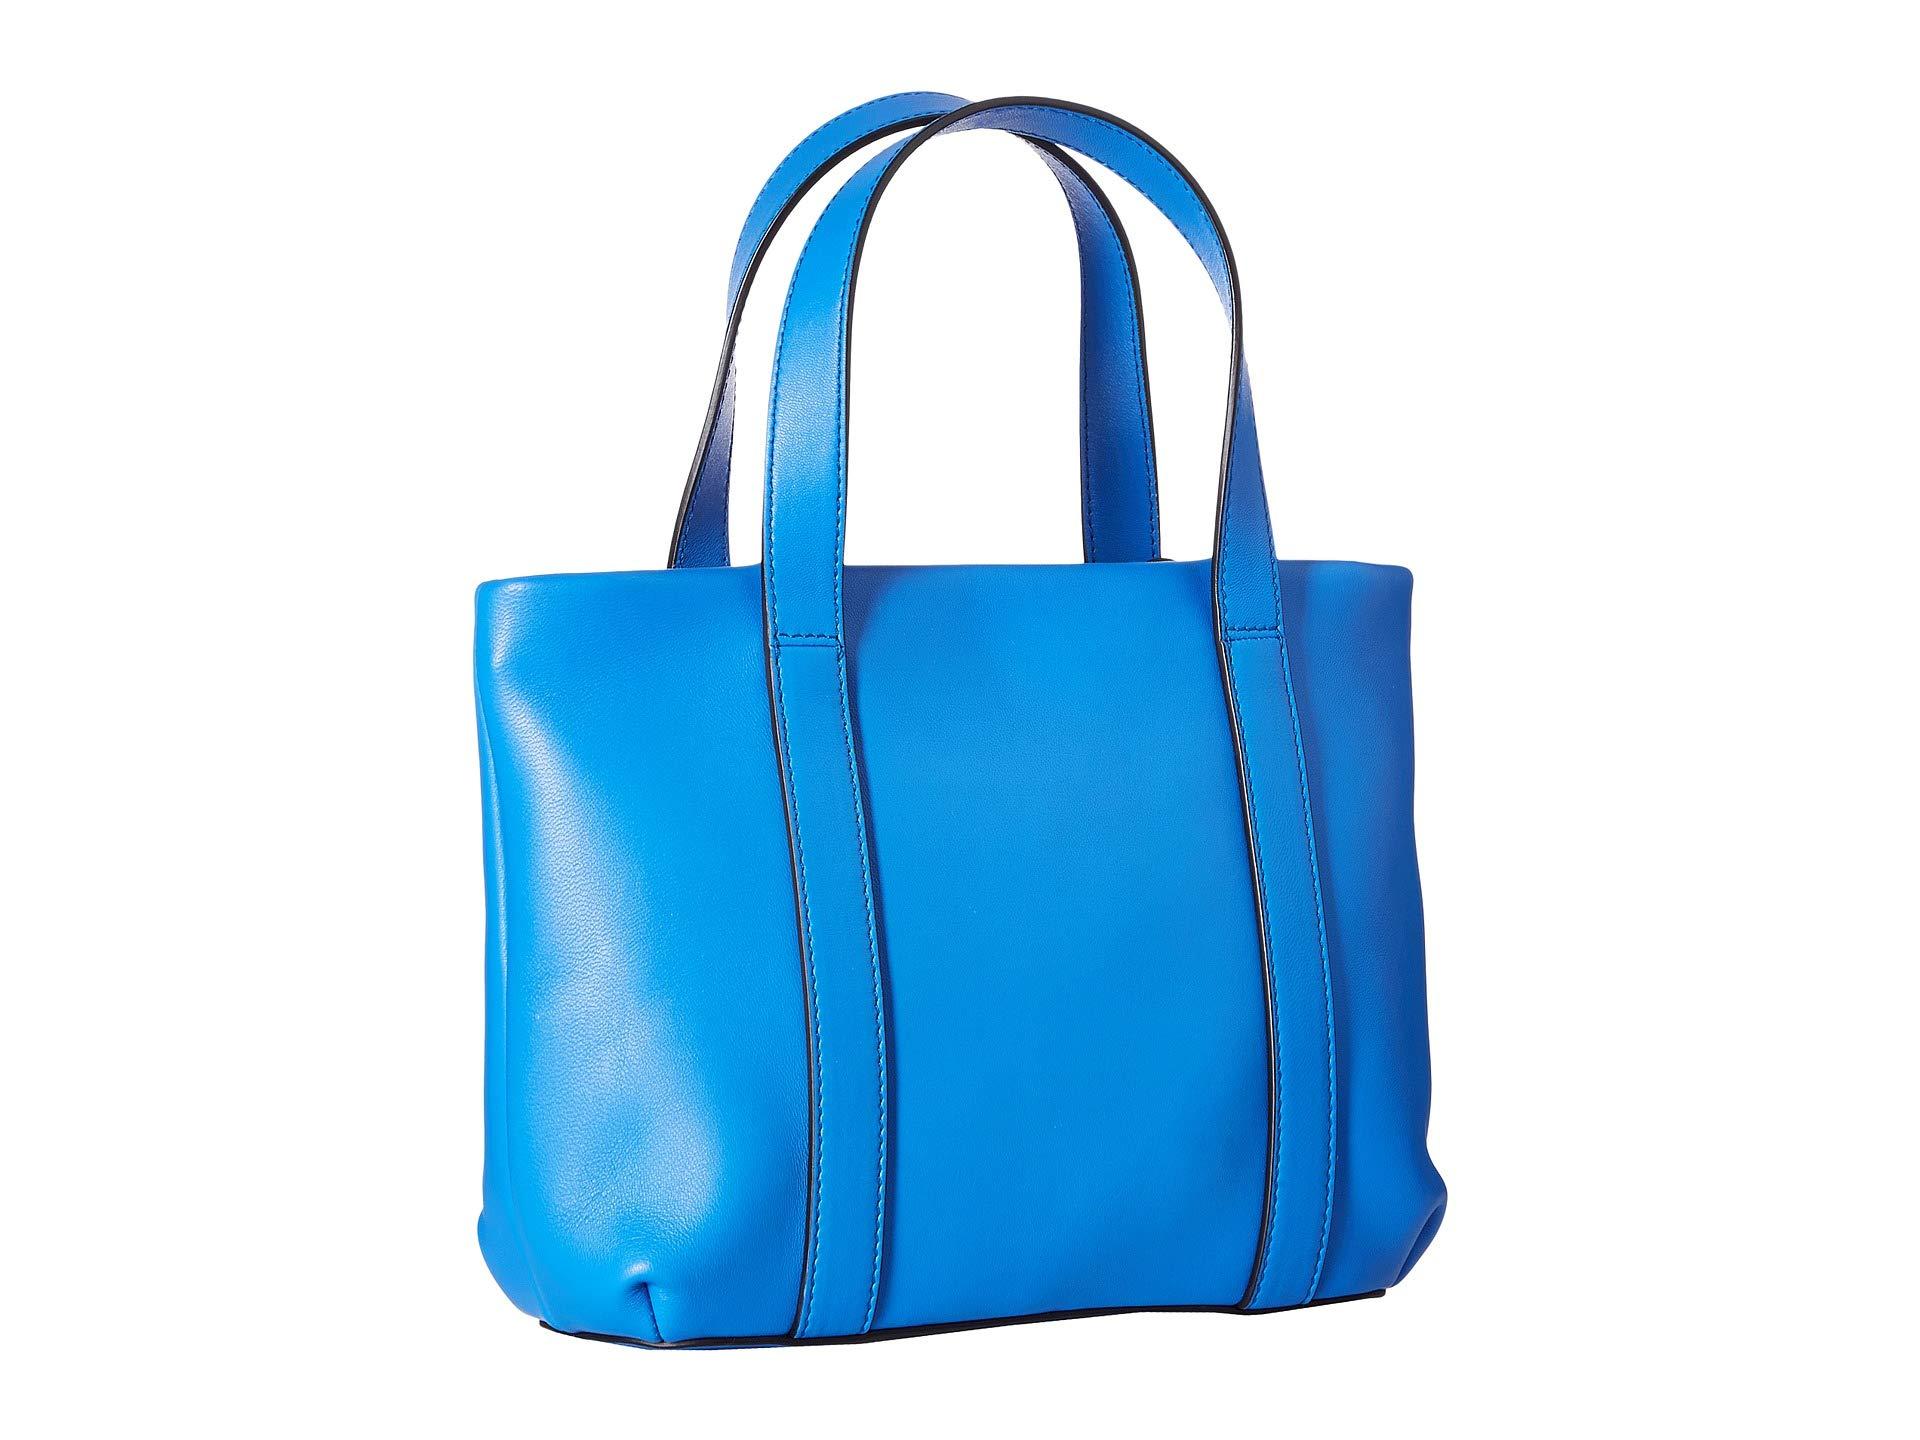 Lipault Leather By The Seine Nano Tote Bag in Cobalt Blue (Blue) - Save ...